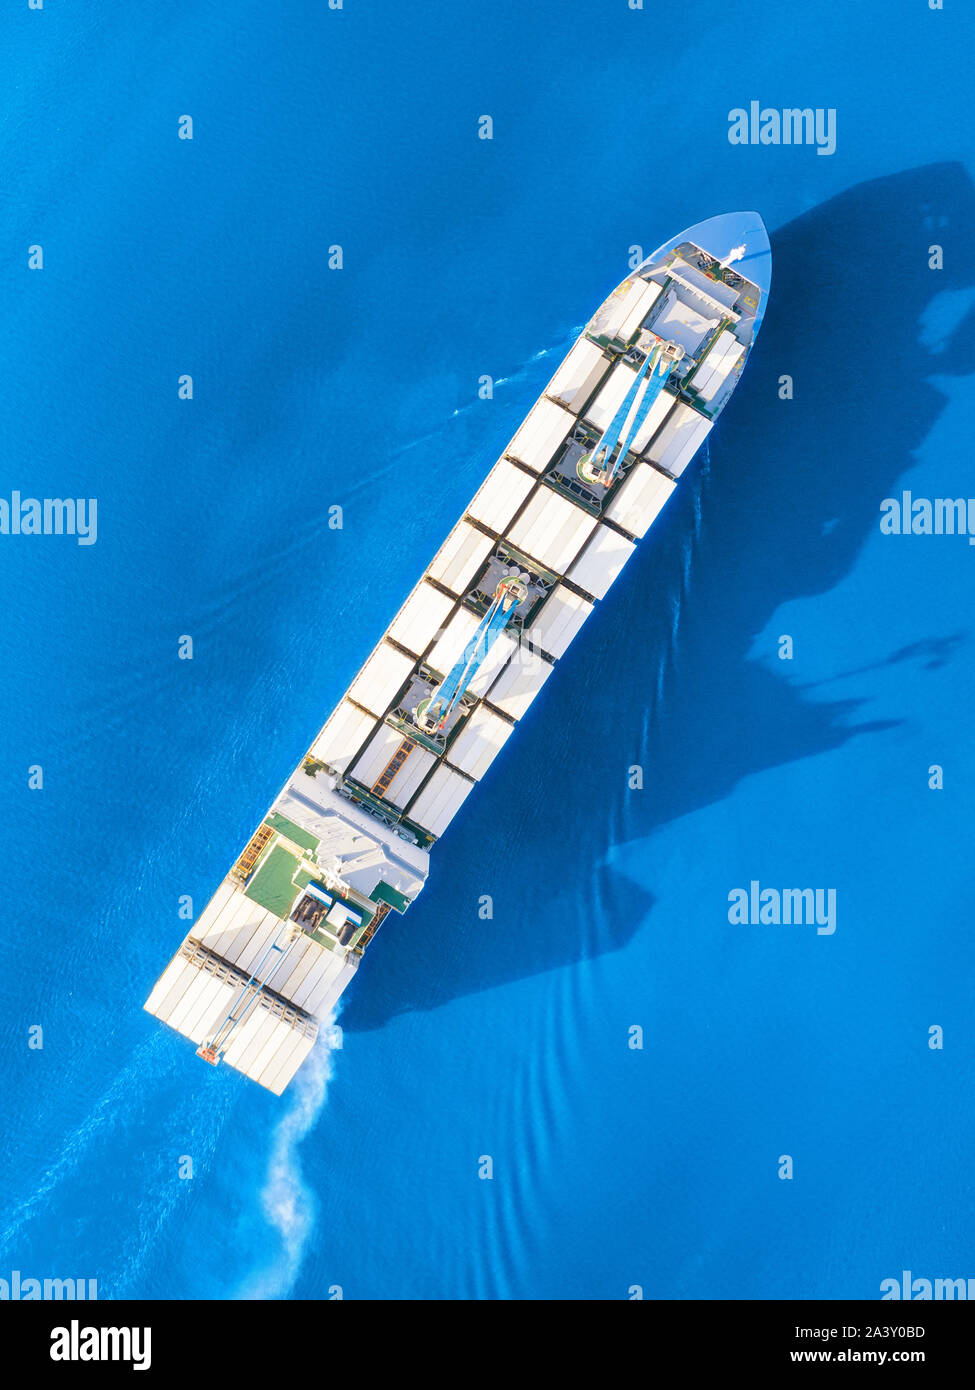 Large full loaded container ship with cranes sailing bright blue sea. Top aerial view Stock Photo